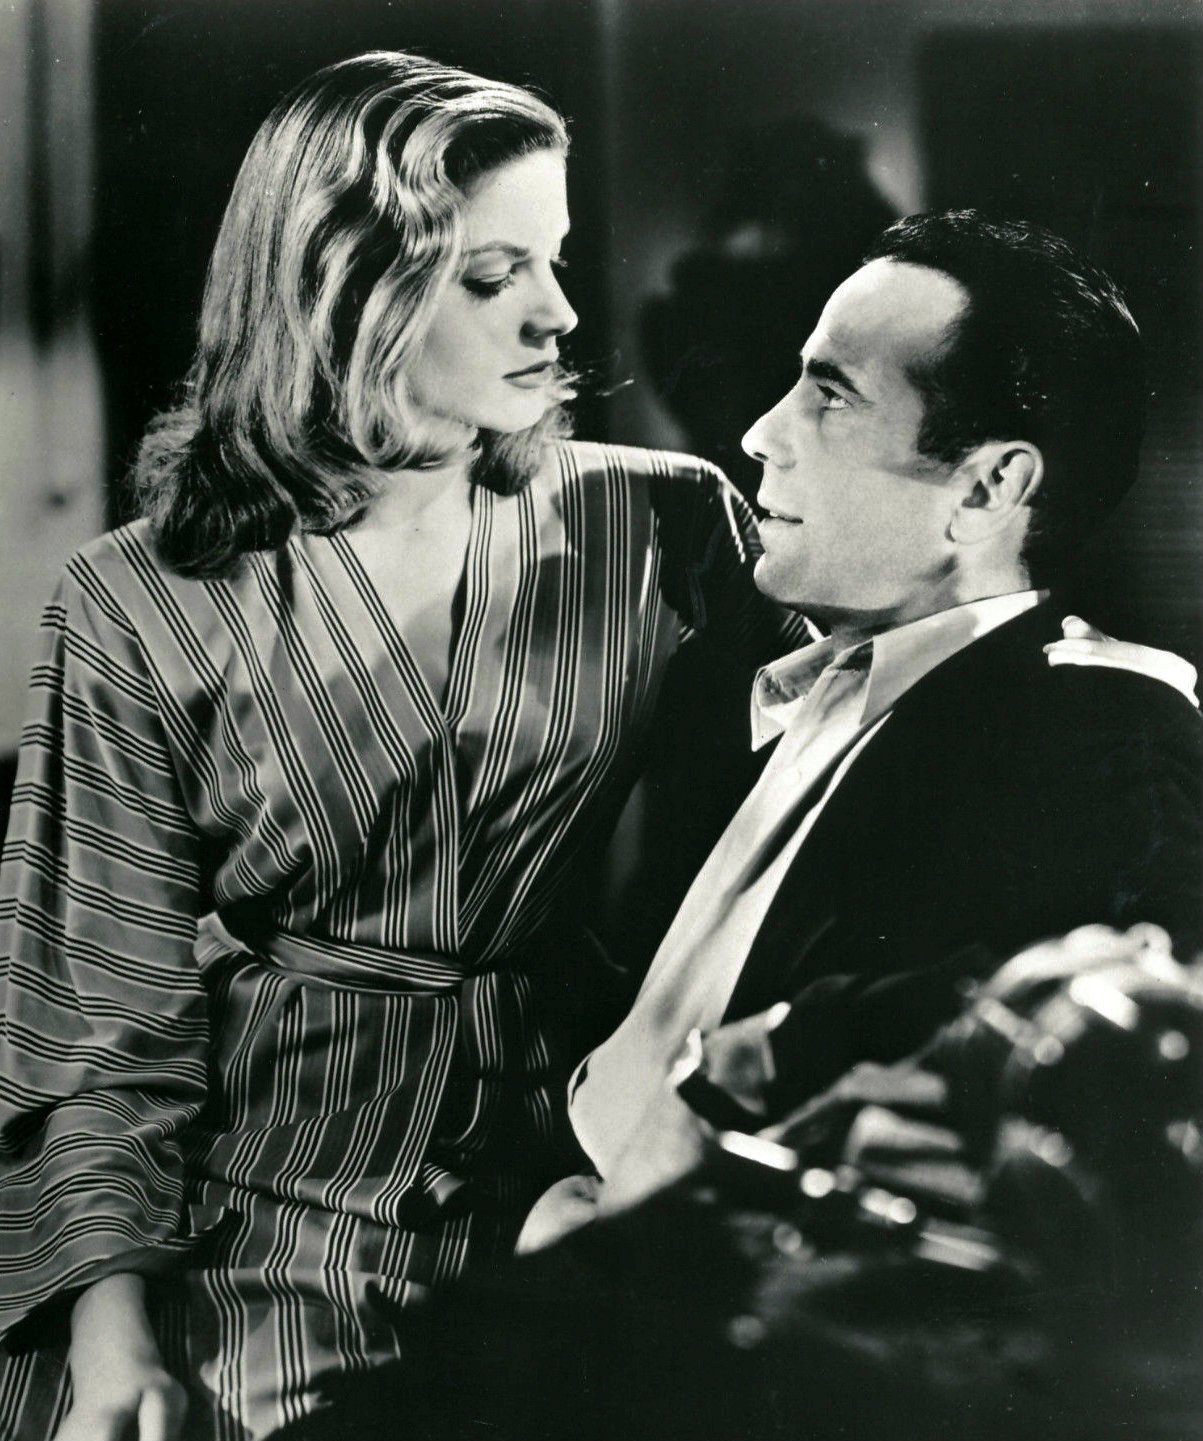 Photo of Lauren Bacall and Humphrey Bogart in a scene from the film "To Have and Have Not." | Source: Wikimedia Commons